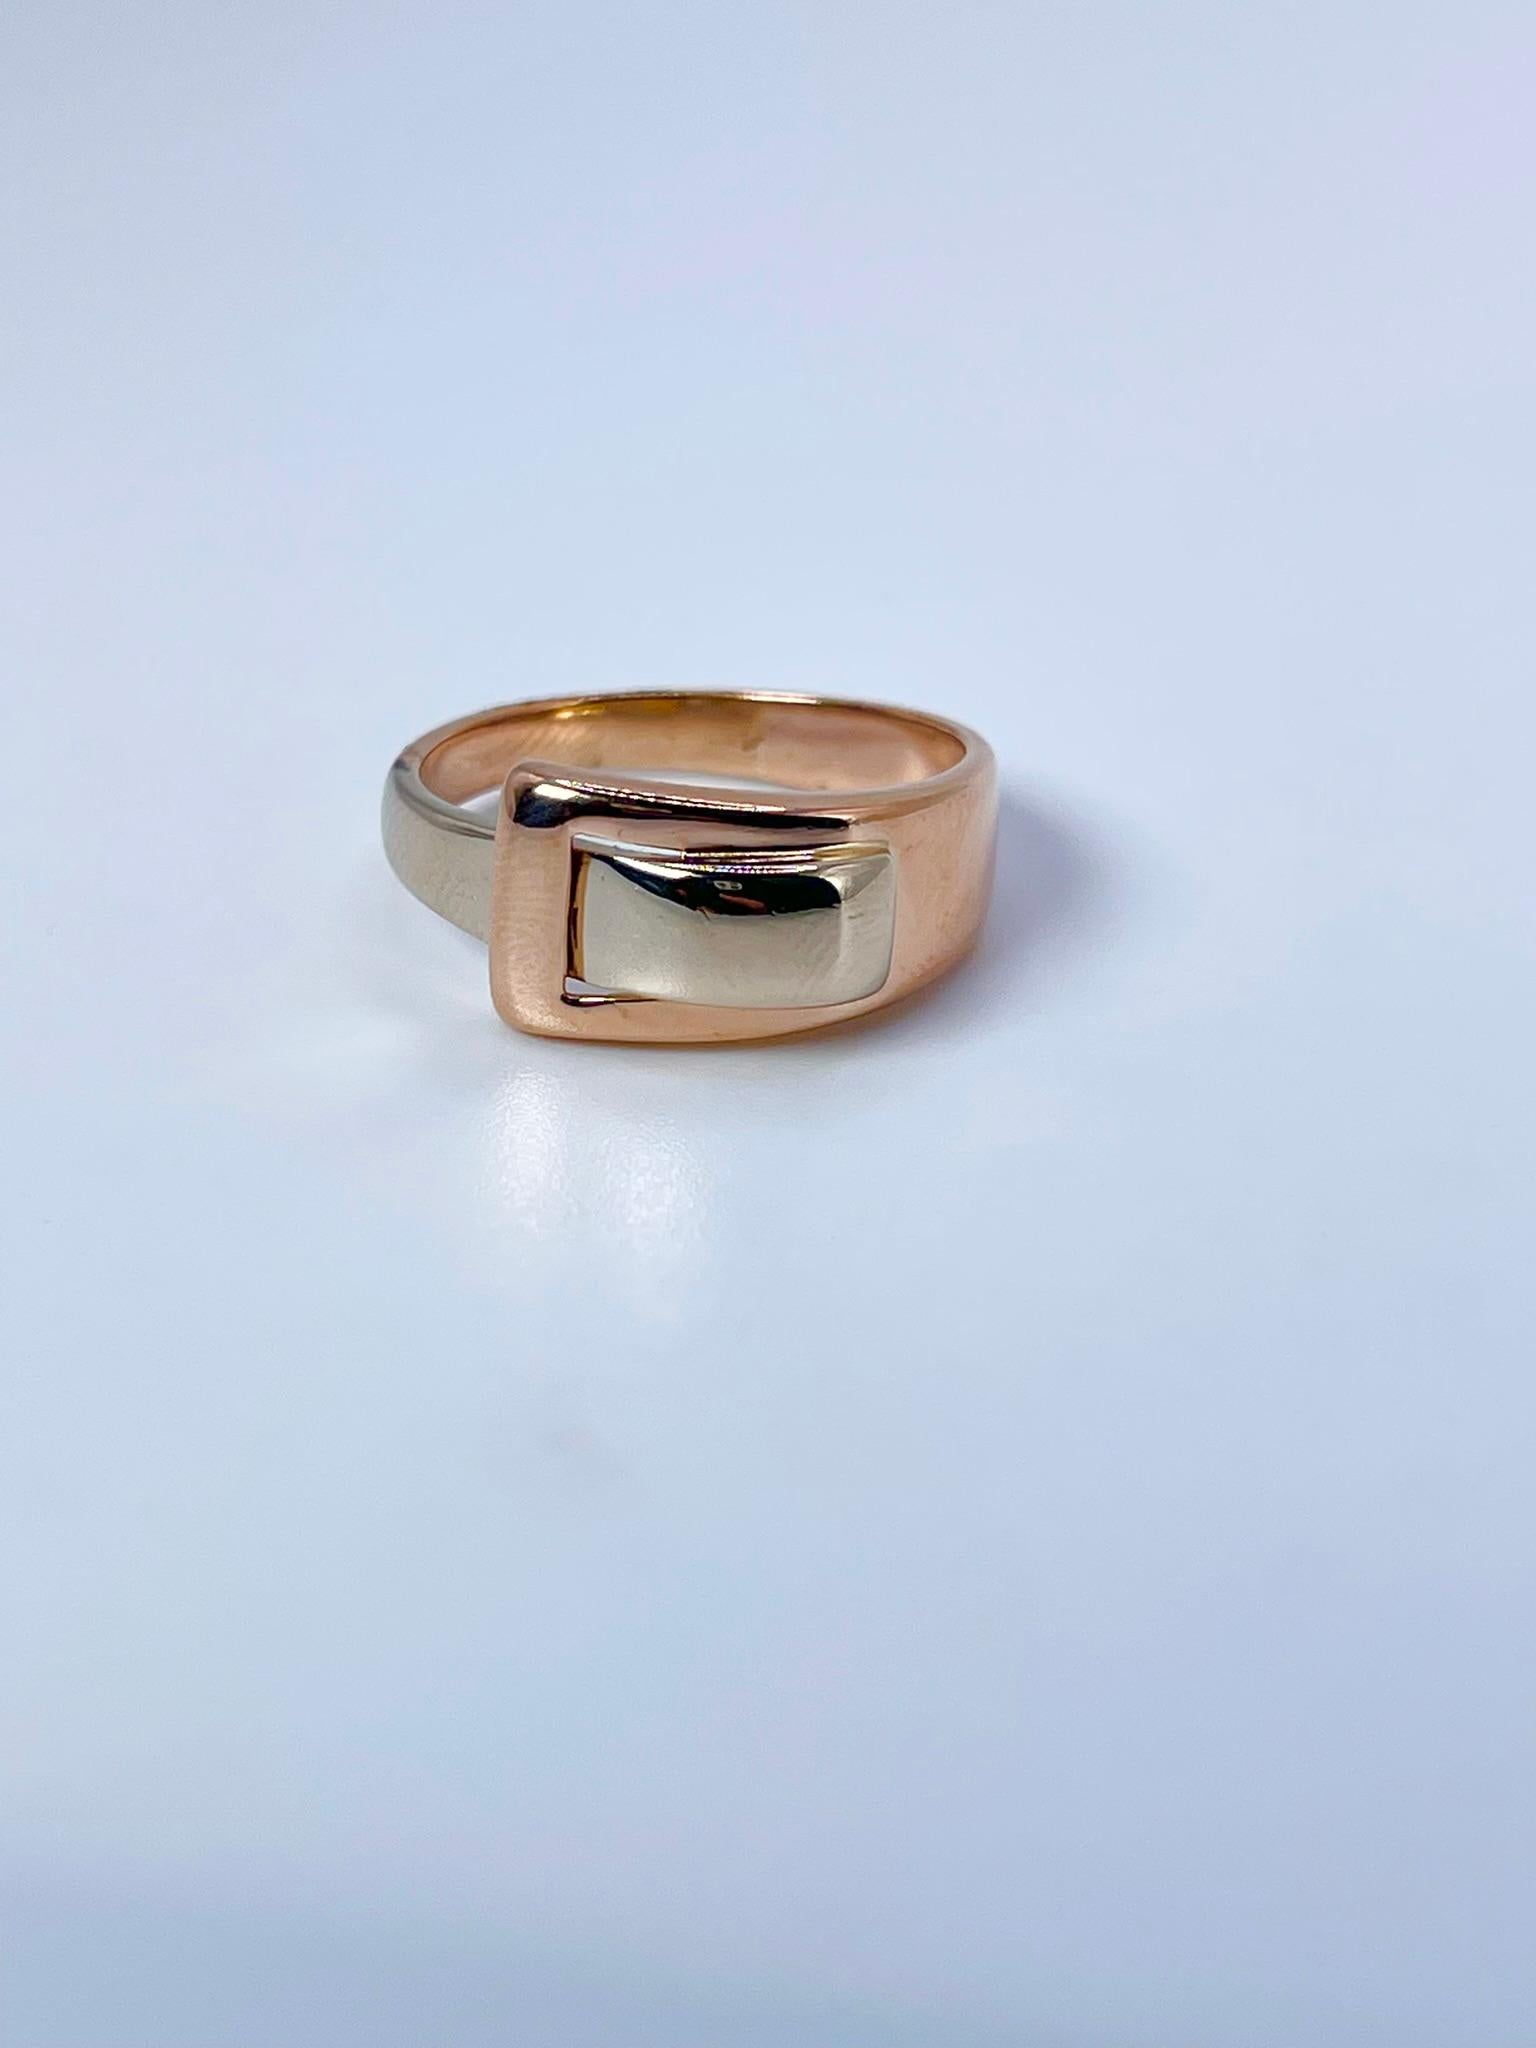 Plain solid gold ring belt design, made in 18KT white and rose gold.
ITEM: AFT 410-00006
GRAM WEIGHT: 6.52gr
GOLD: 18KT gold
WIDTH: 10MM
SIZE: 10.5

WHAT YOU GET AT STAMPAR JEWELERS:
Stampar Jewelers, located in the heart of Jupiter, Florida, is a